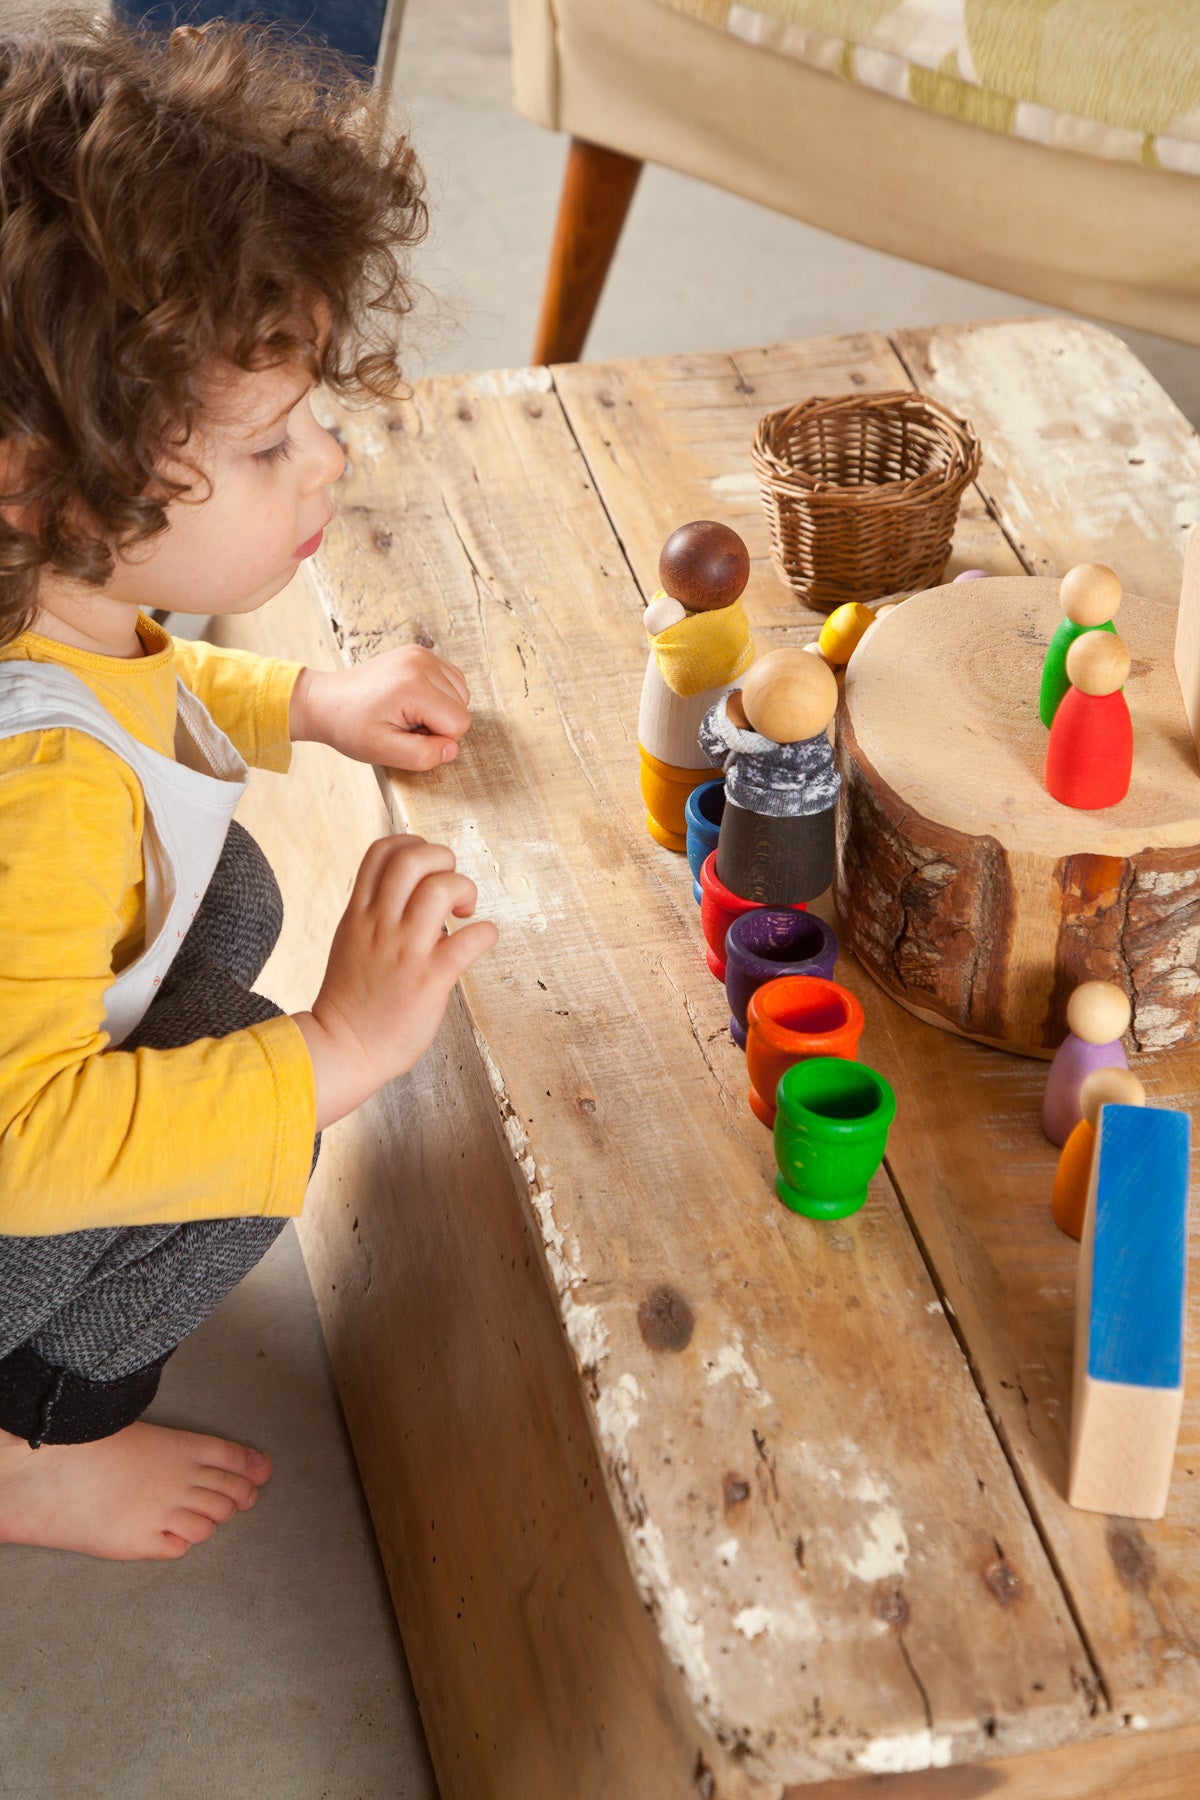 A child playing with colorful wooden peg people and rainbow wooden cups on a wood table.